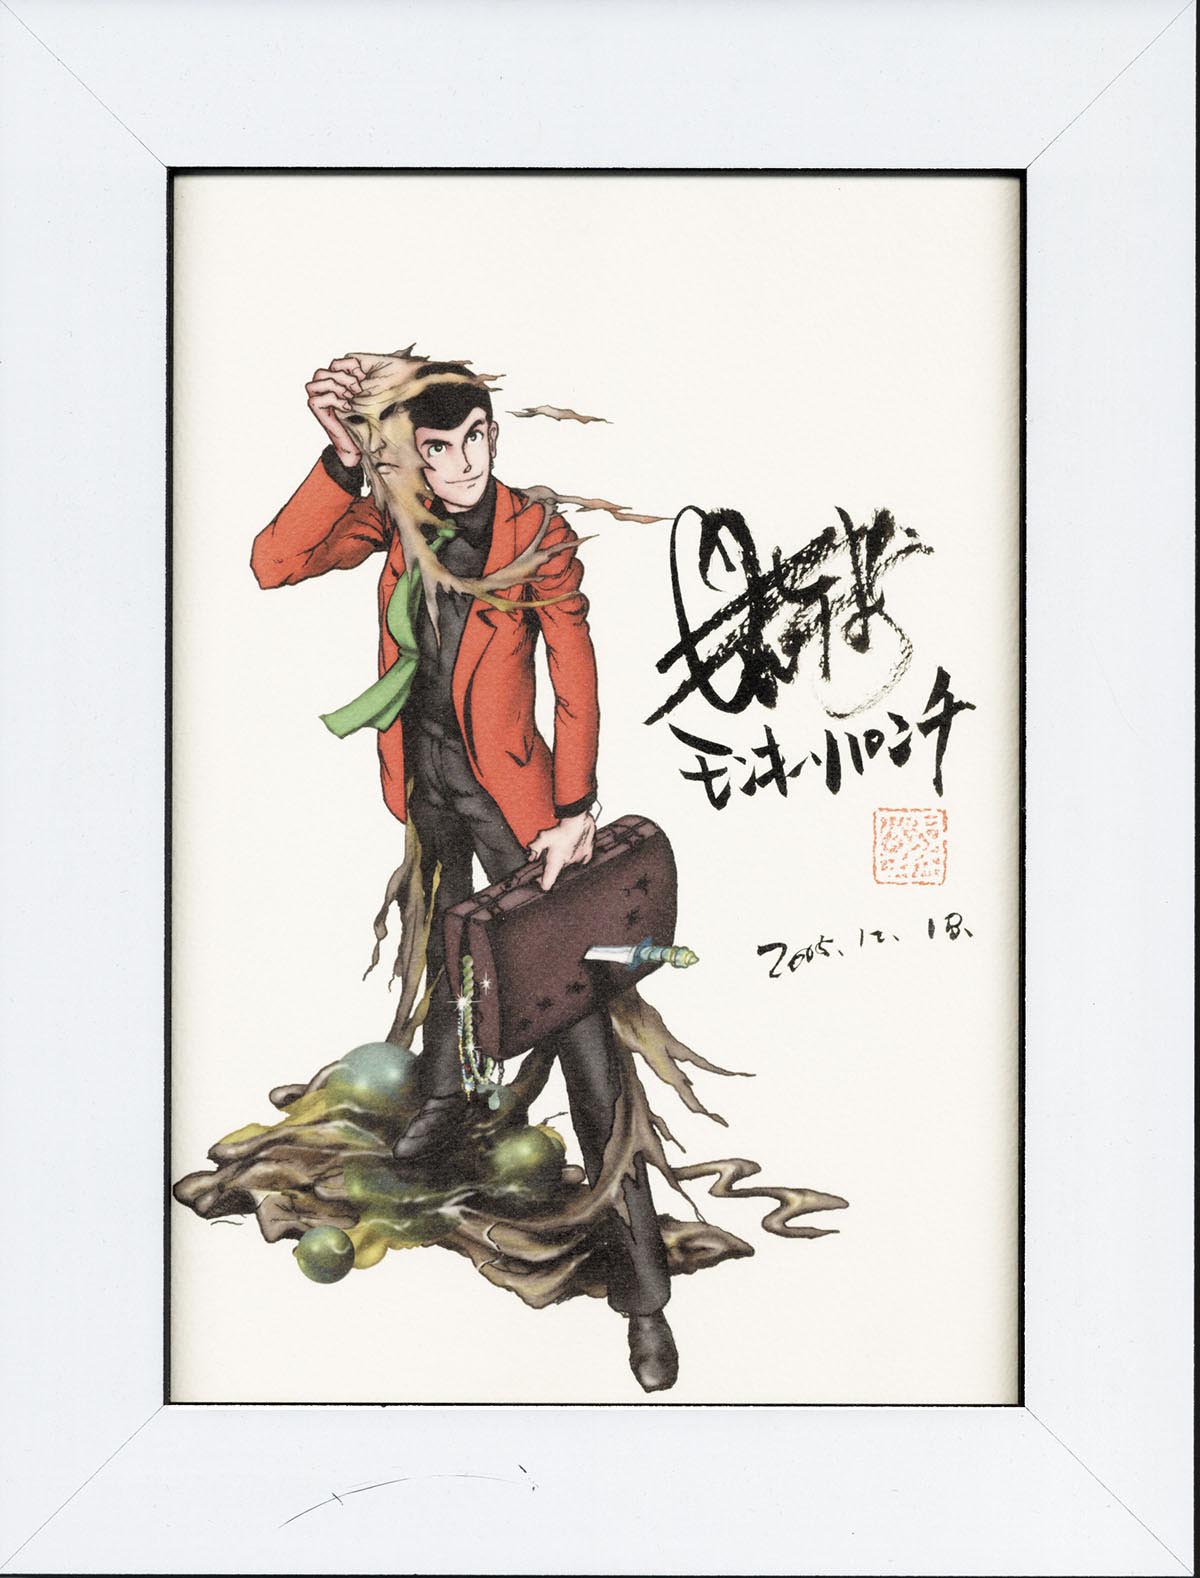 Monkey Punch Art on X: Art from Shin Lupin III (1977-1981) written and  ilustrated by Monkey Punch. “Jigen Daisuke, the best marksman in the world,  has a draw speed of 0.3 seconds.